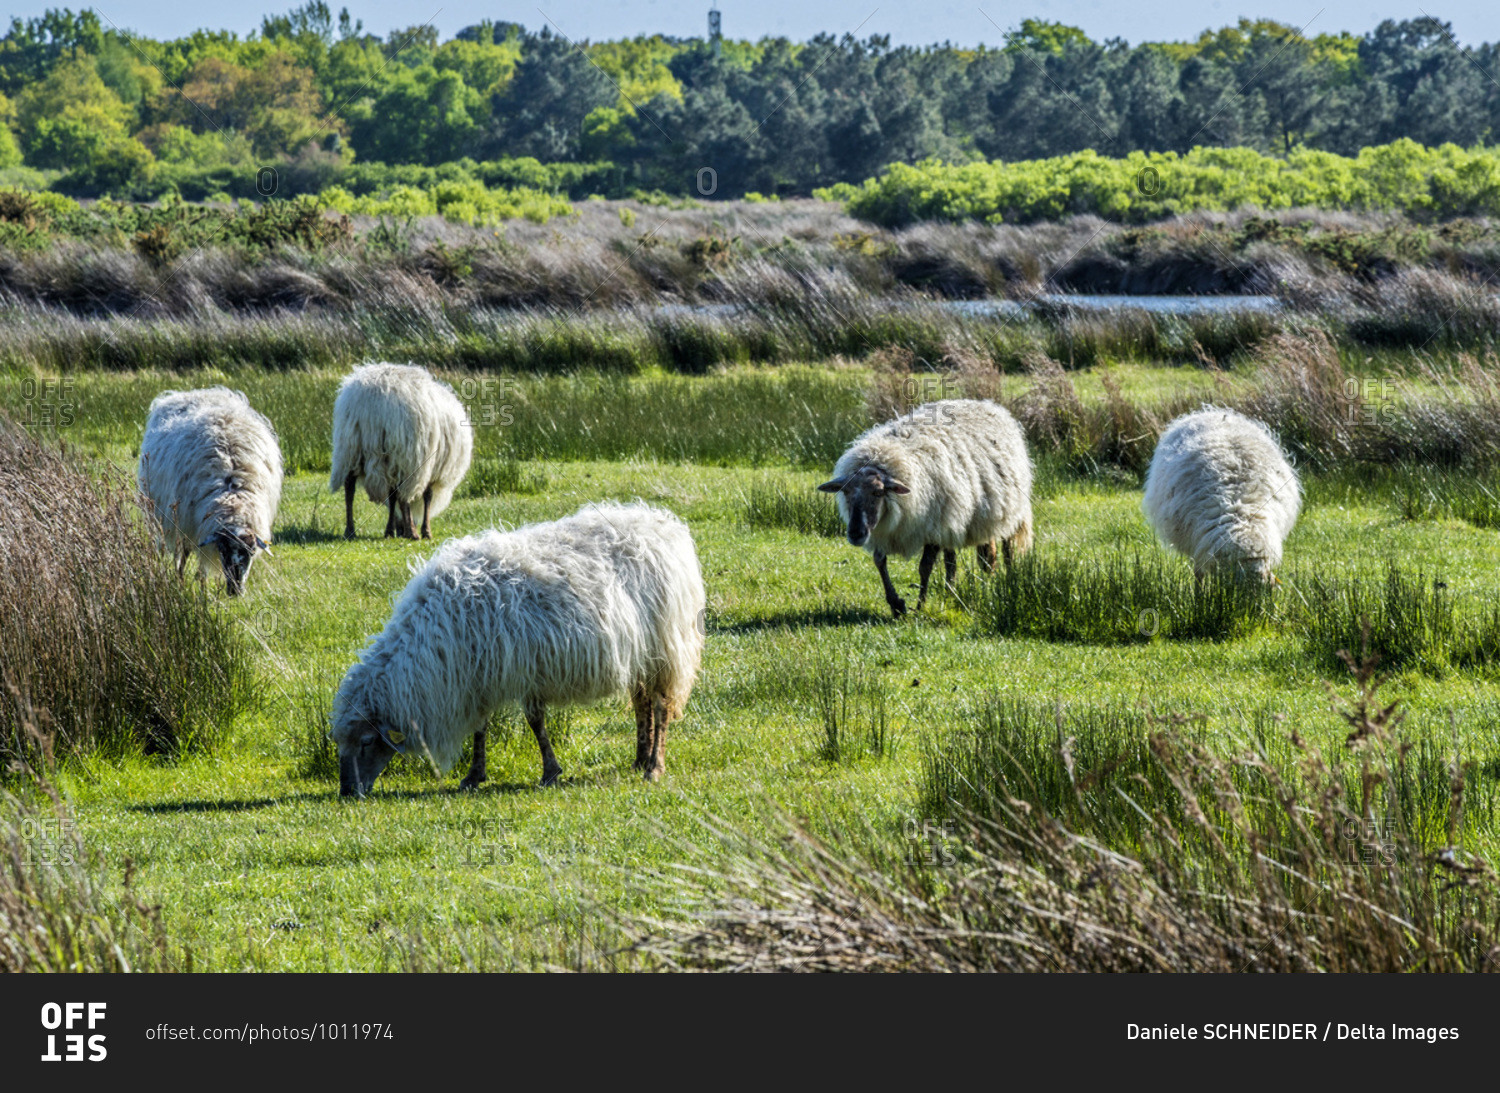 France, Arcachon Bay, Teich ornithological park, flock of sheep grazing in the pasture